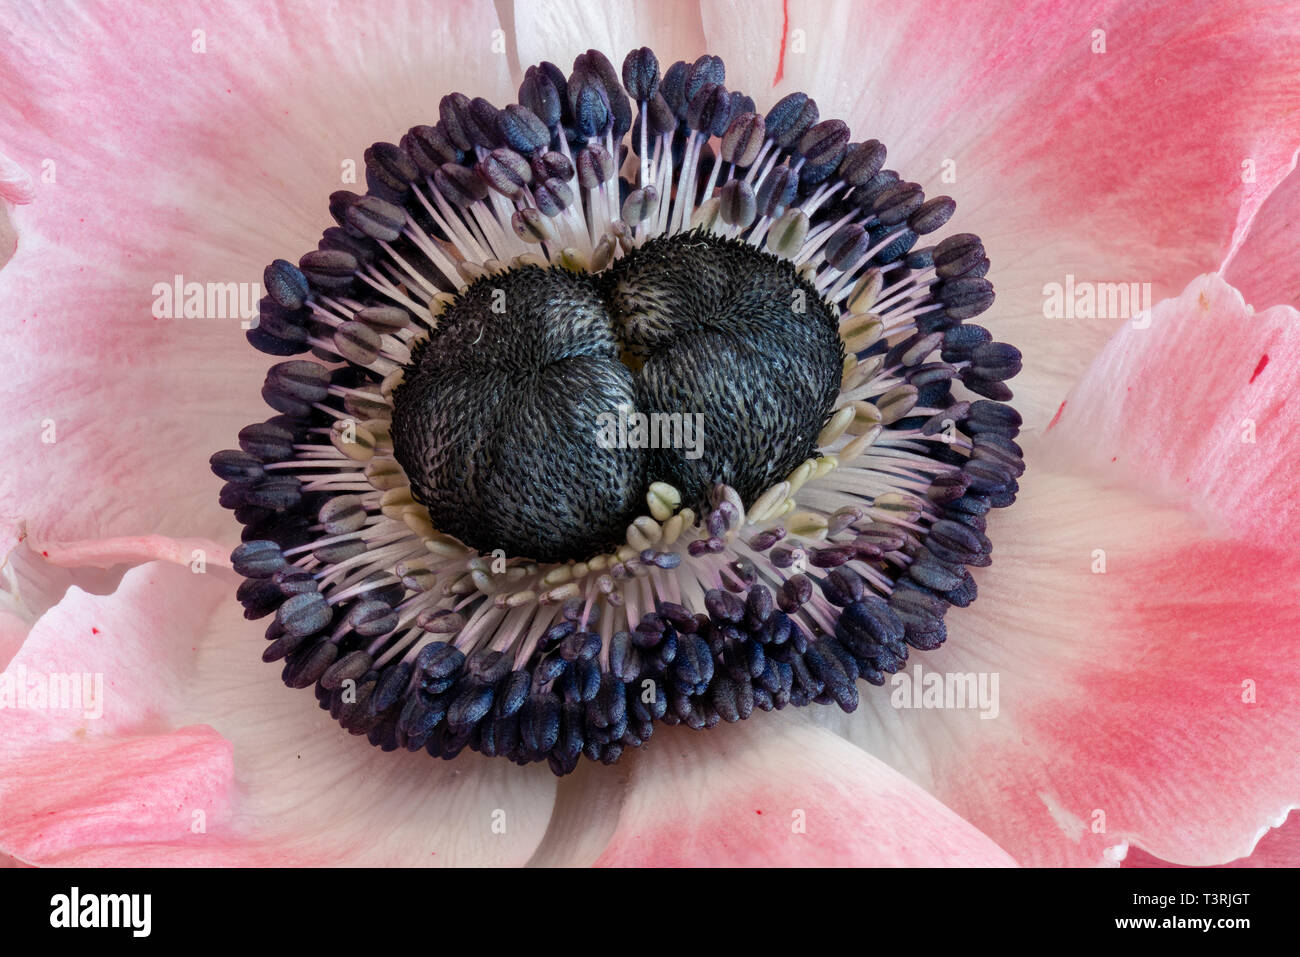 Fine art still life floral macro of the center / heart of a single isolated bright white pink blue anemone blossom with double heart, detailed texture Stock Photo